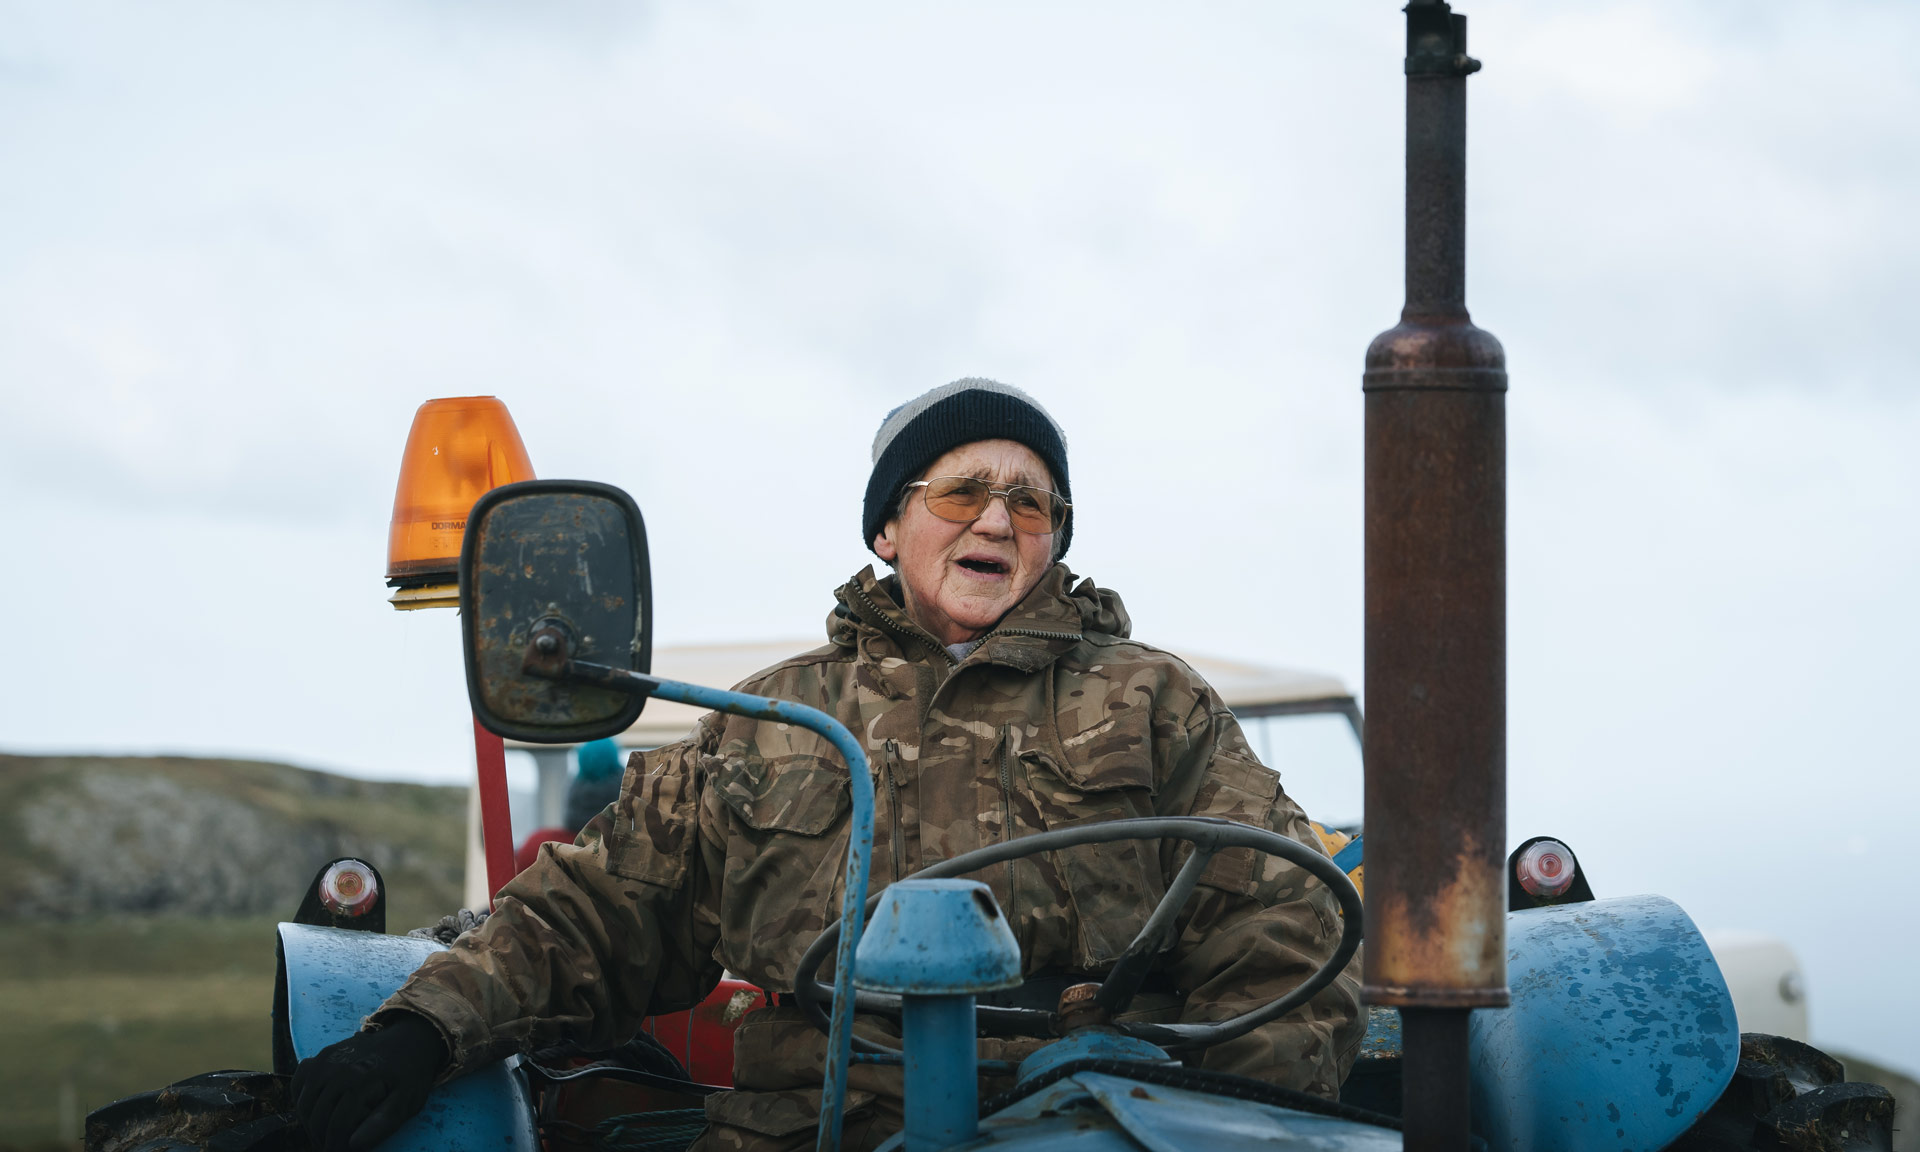 Farmer sits at her tractor